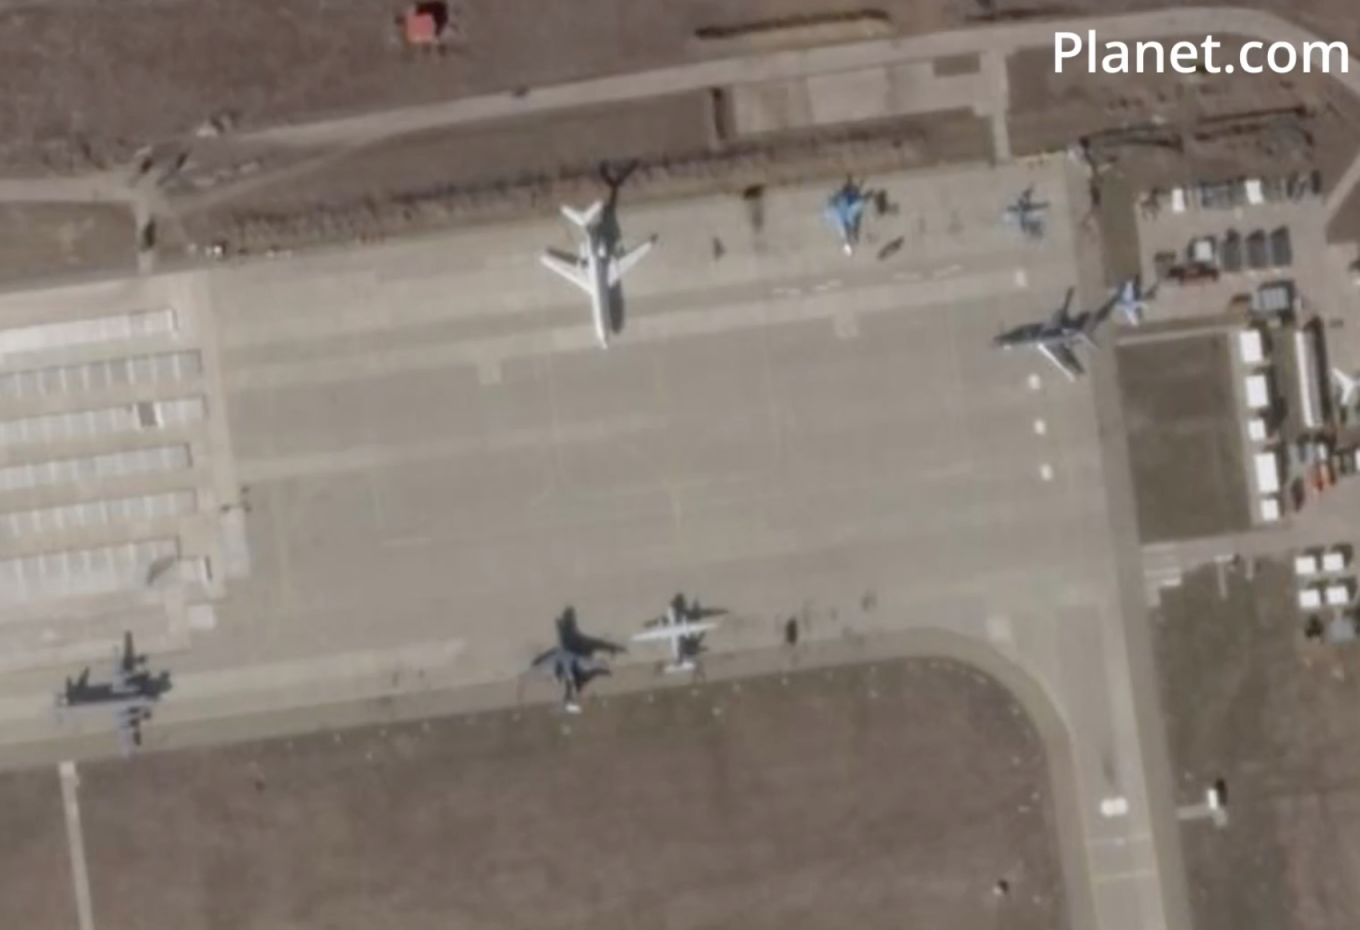 The Yeysk airfield on March 2 Defense Express Ukrainian Air Force Shot Down Su-34 Long-Range Interdictor, 6 such Aircraft Disappeared from russian Airfield (video)